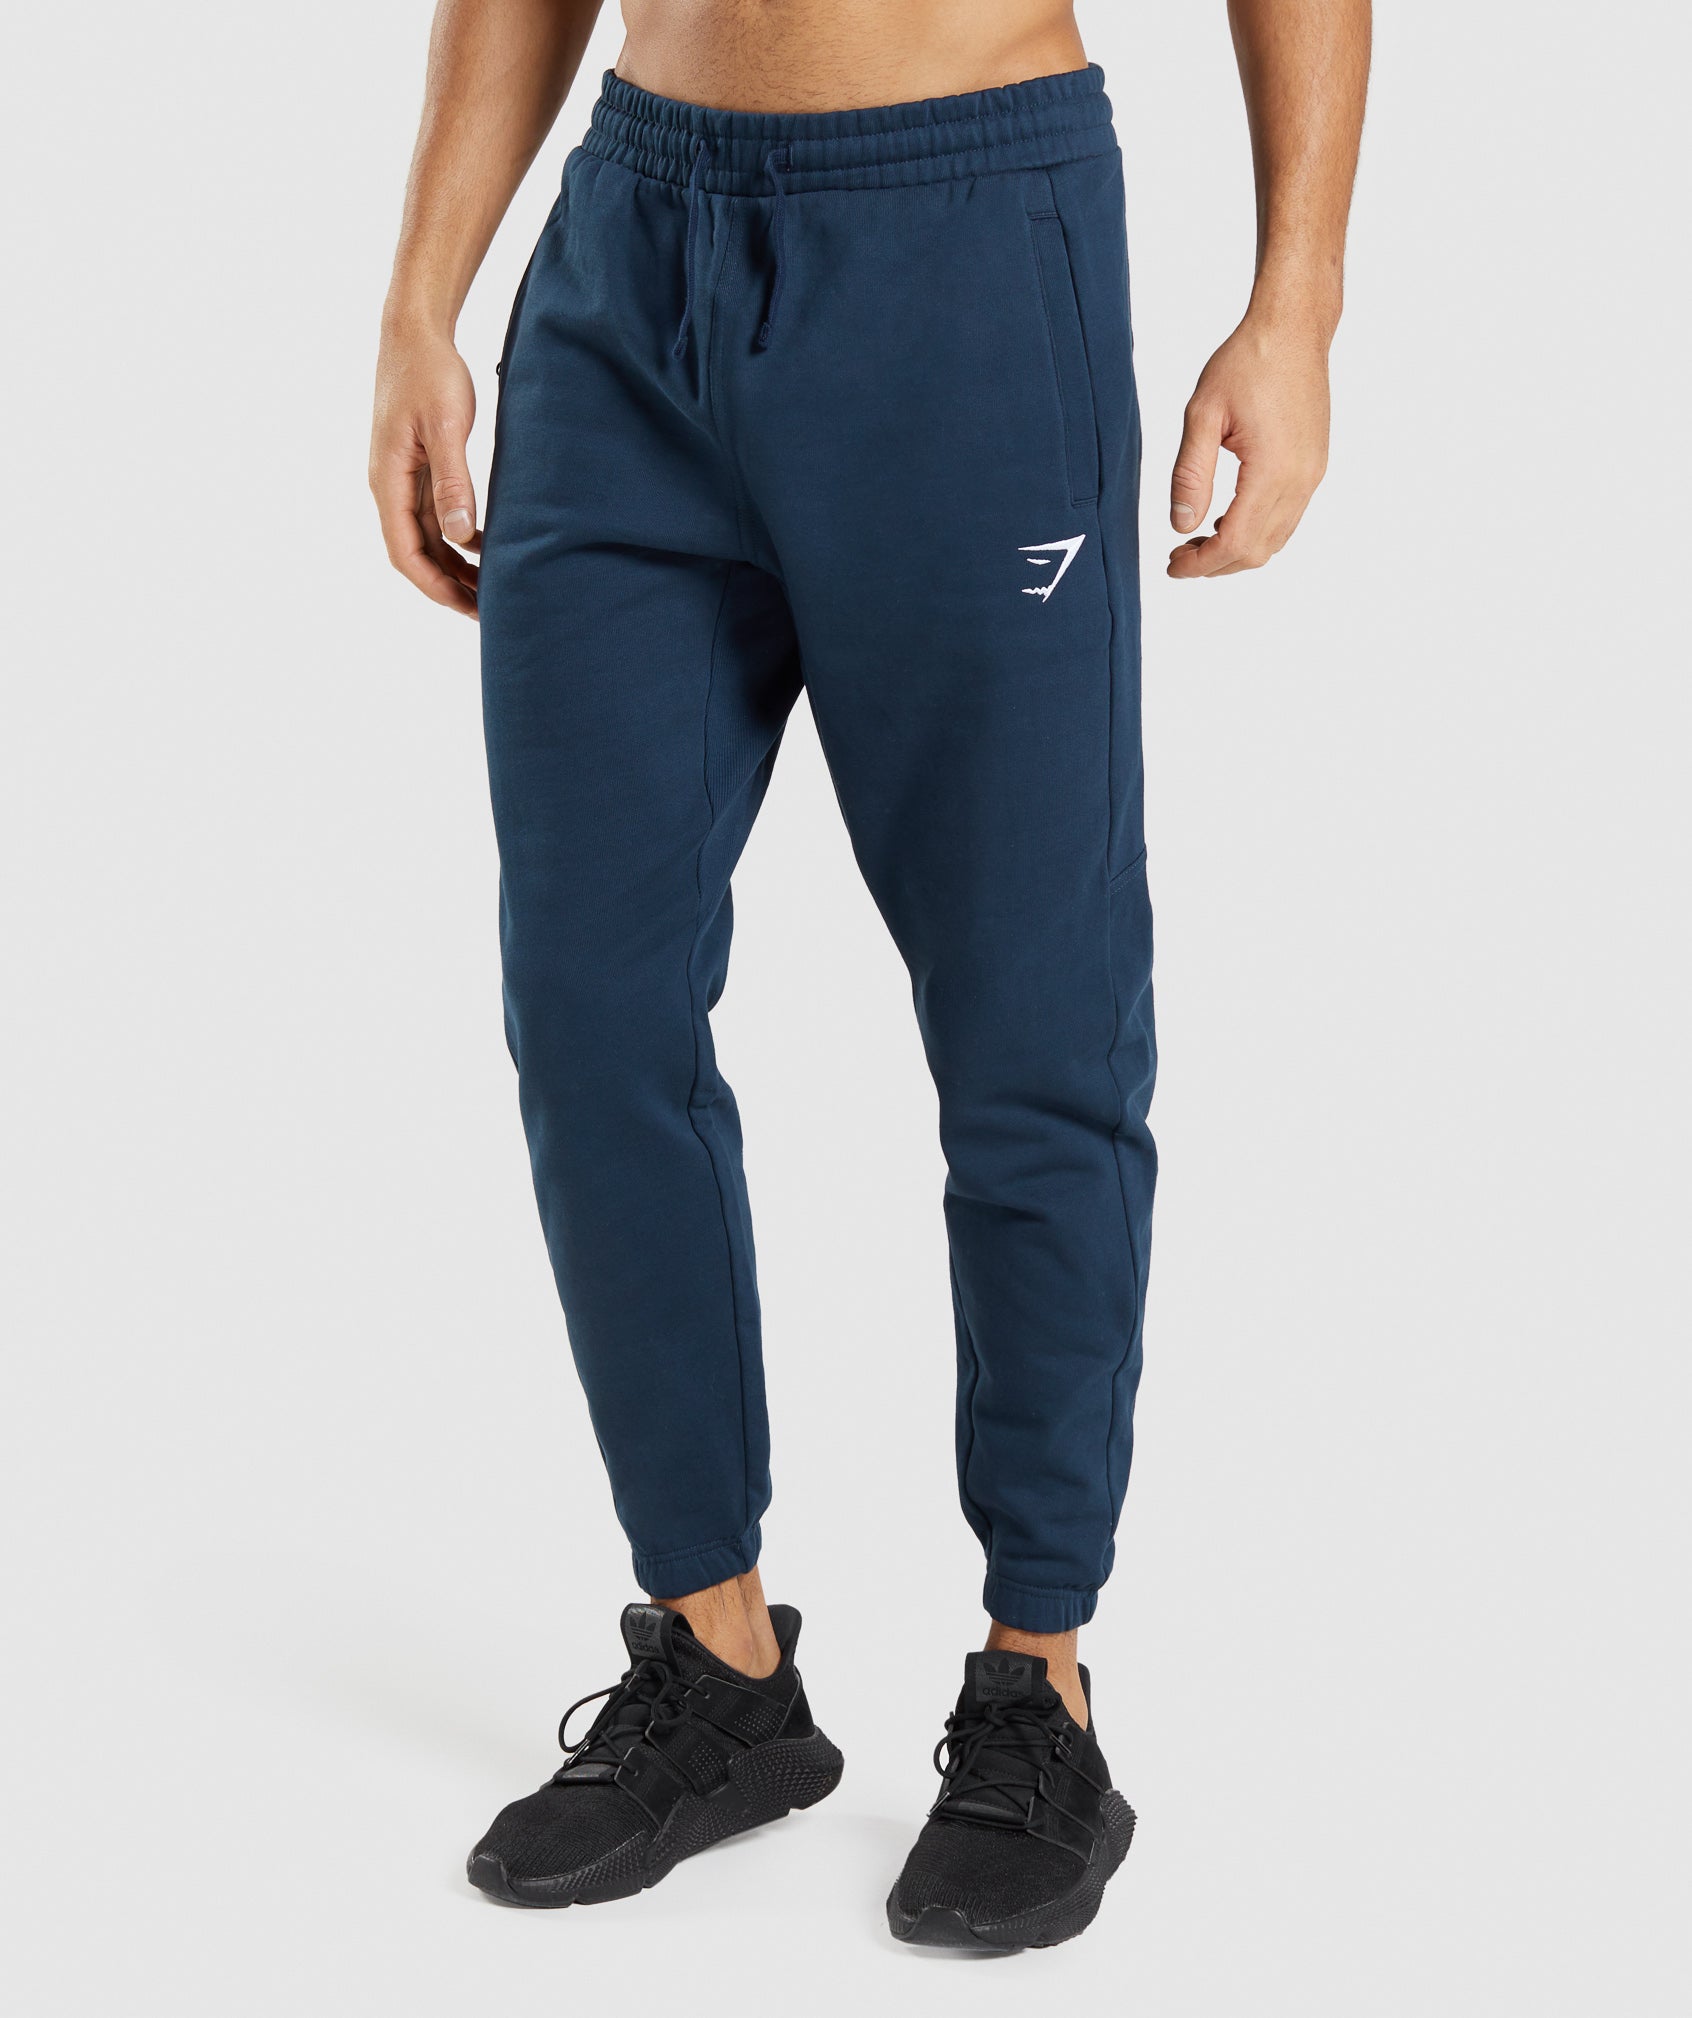 Essential Jogger in Navy - view 1